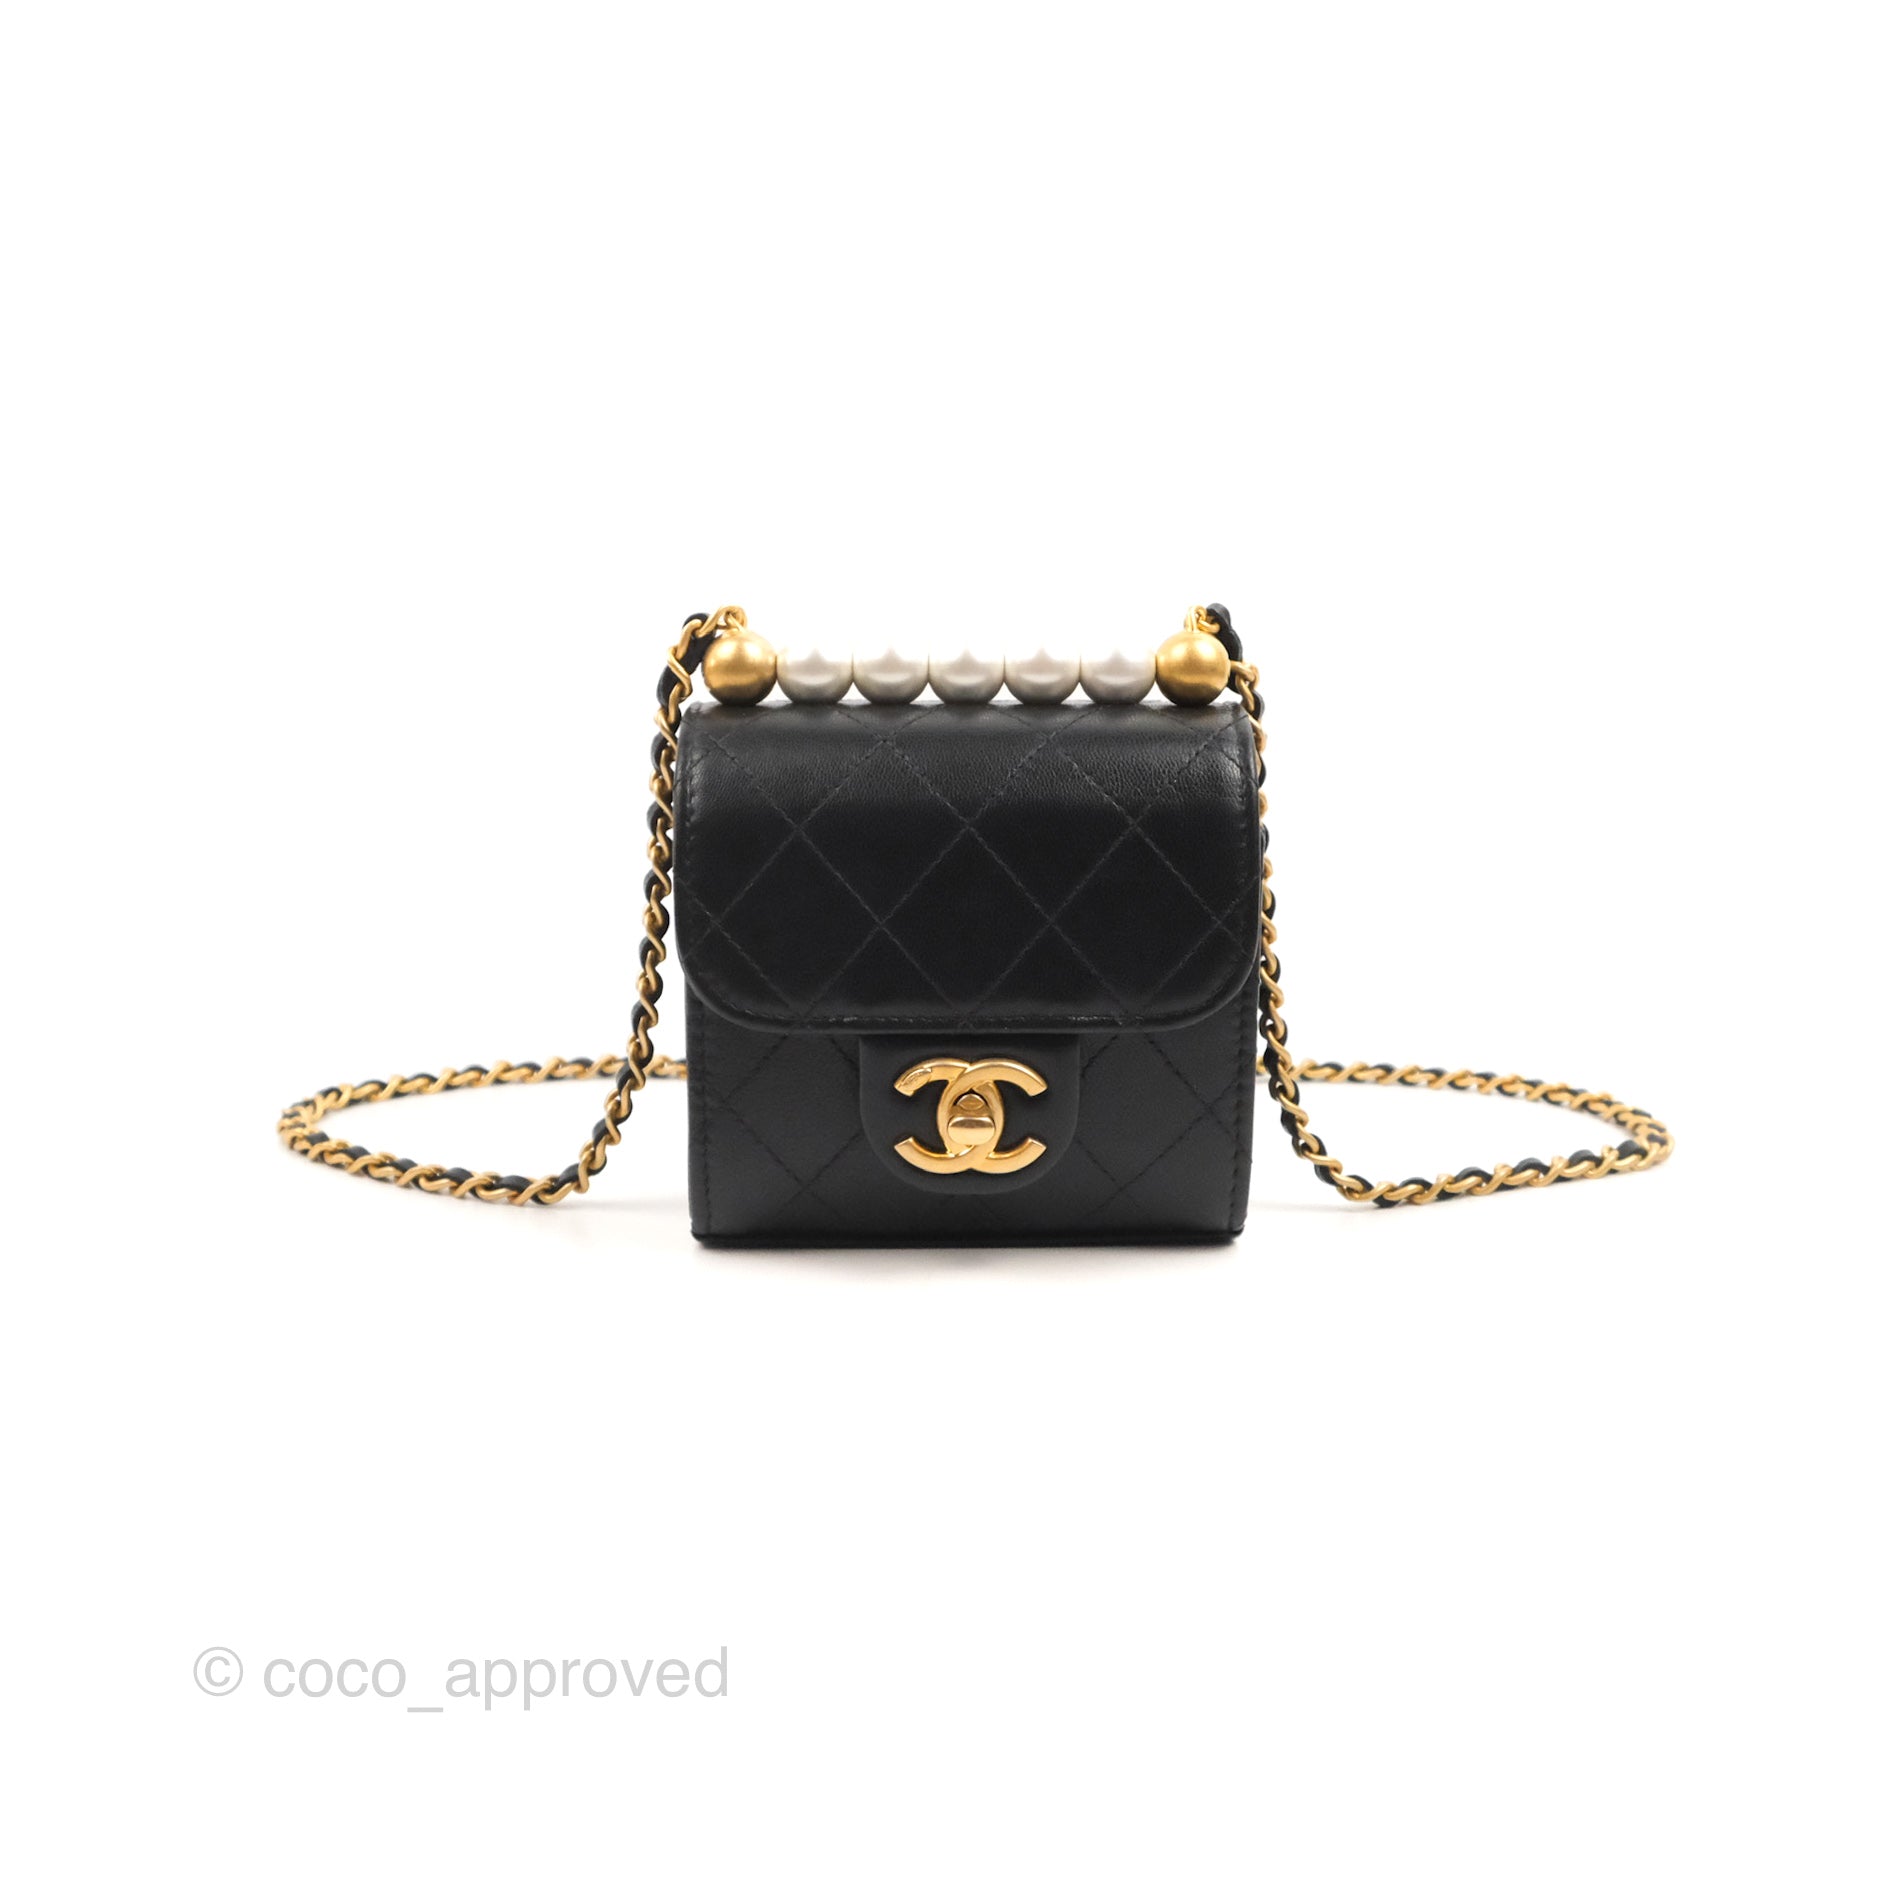 CHANEL  BLACK CHIC PEARLS SMALL FLAP BAG IN